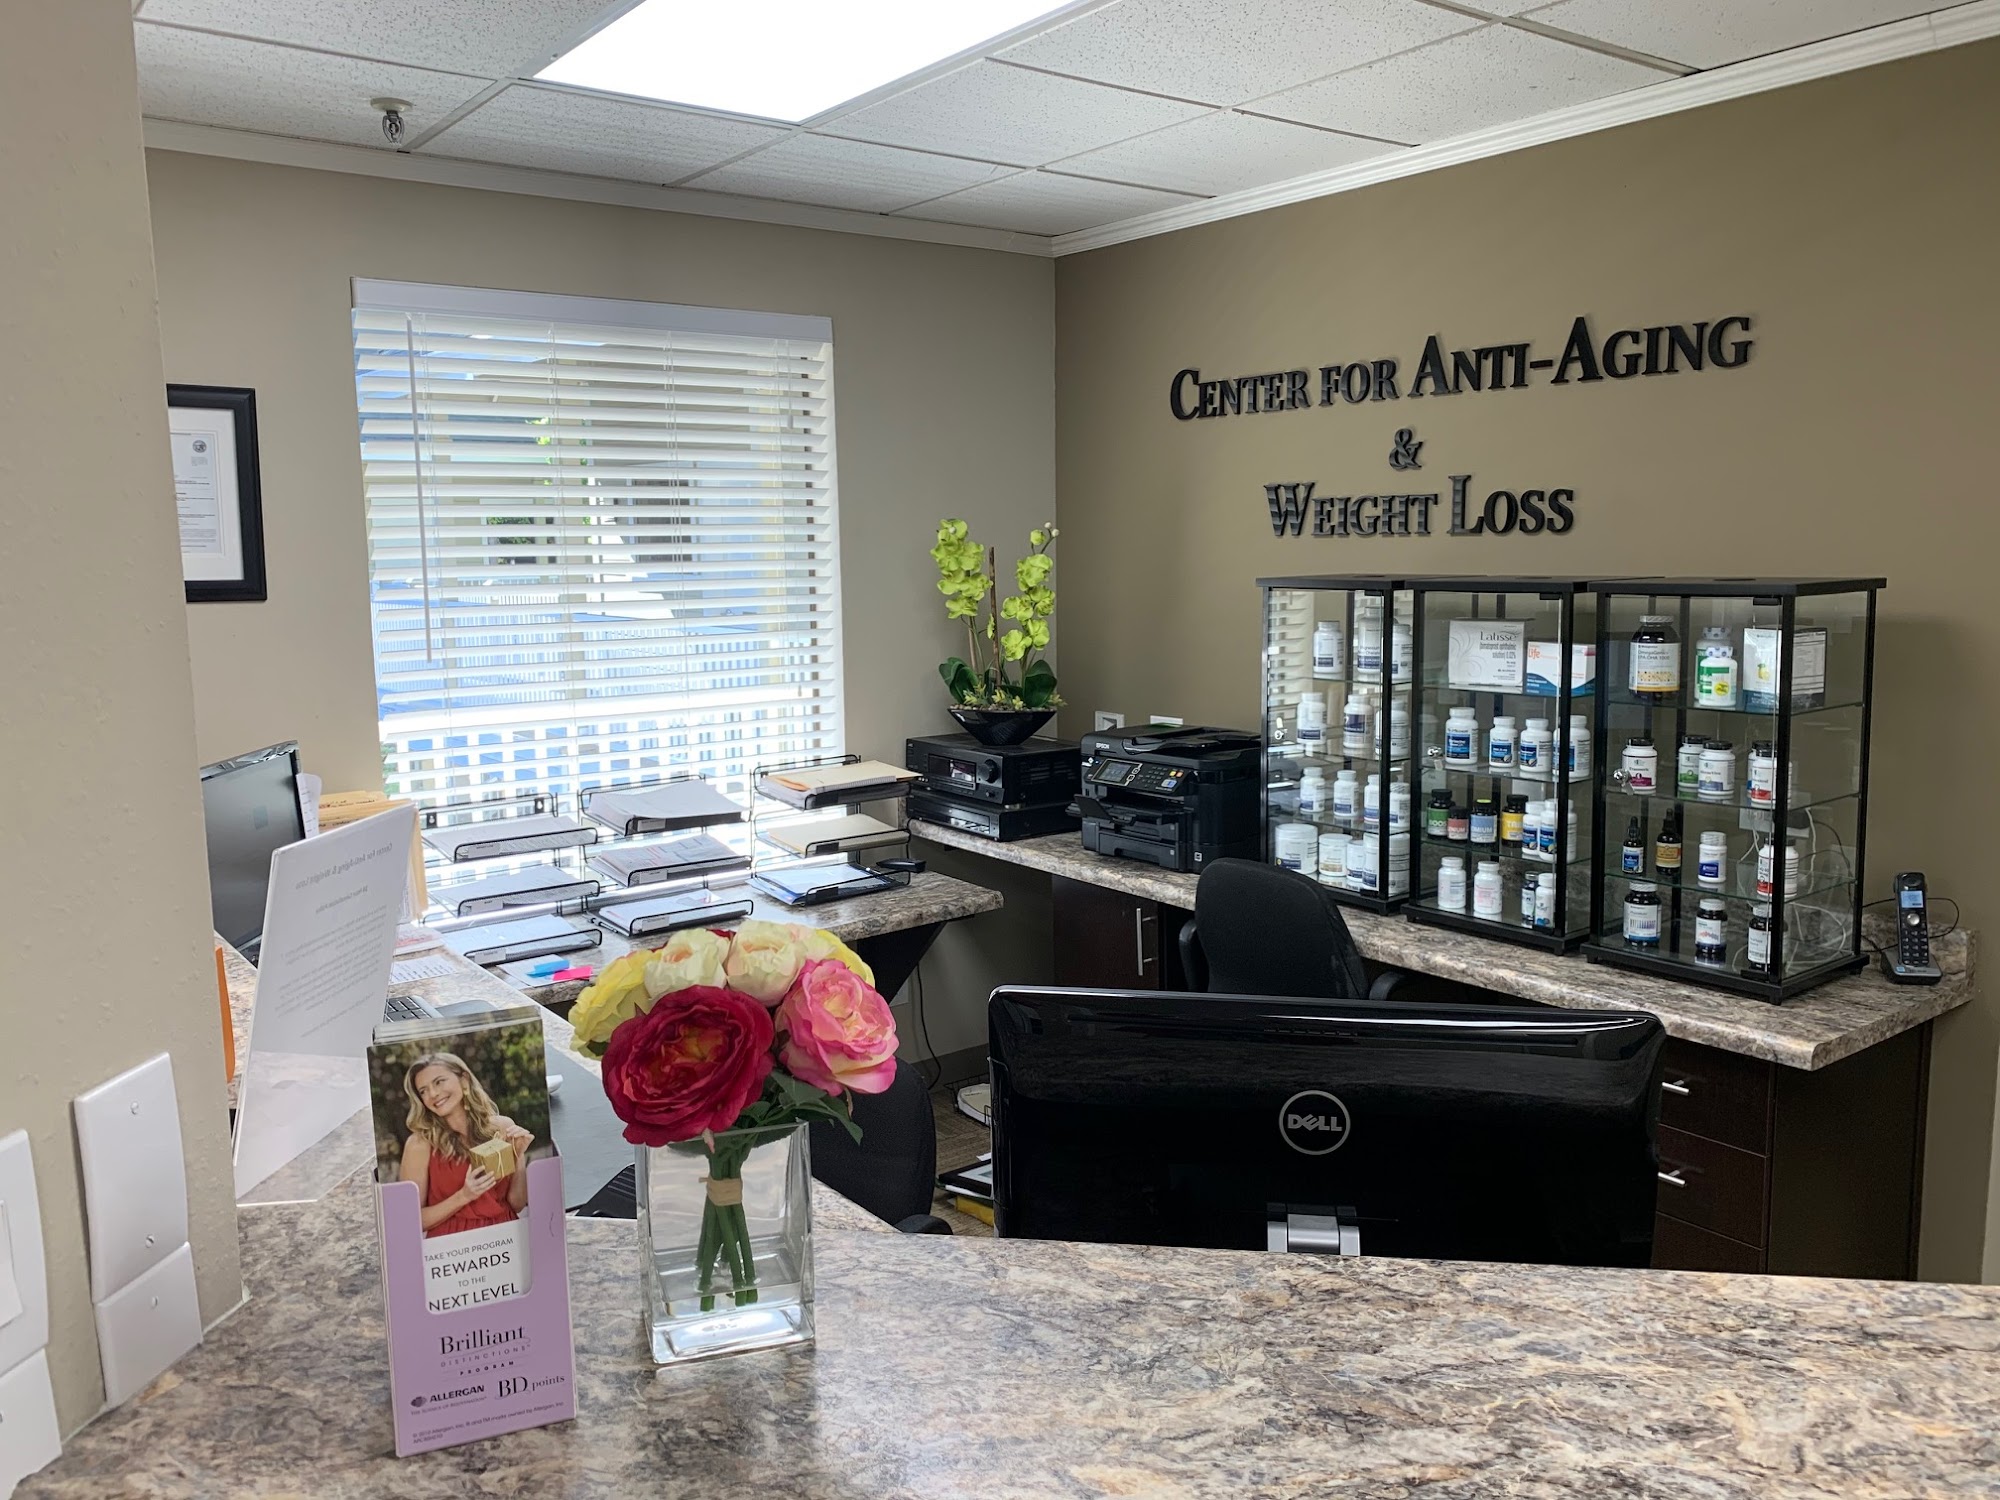 Center for Anti-Aging and Weight Loss